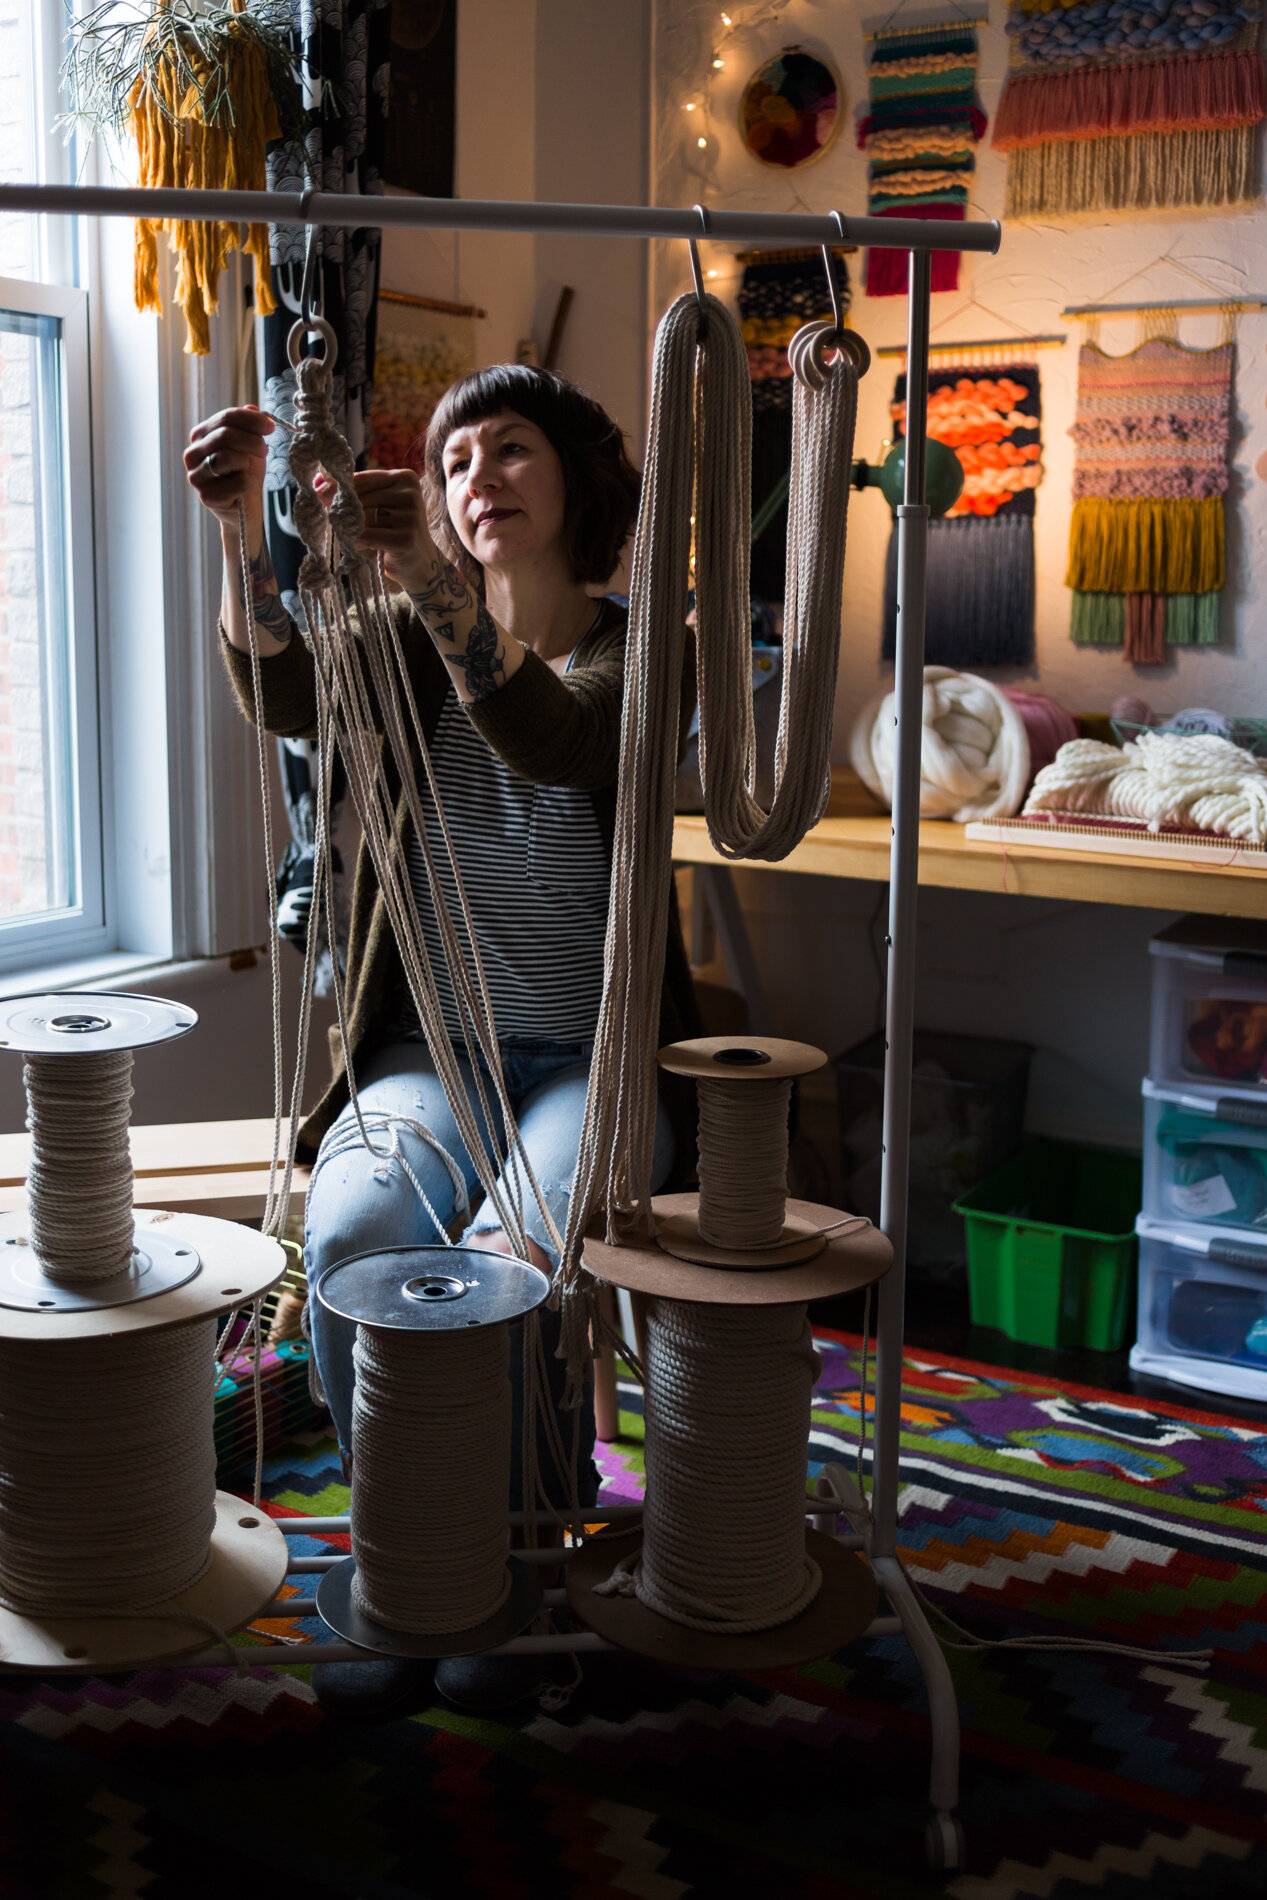 Jen Duffin (Nova Mercury) uses fibres and textiles to make hanging planters in her home studio in Montréal, Canada.